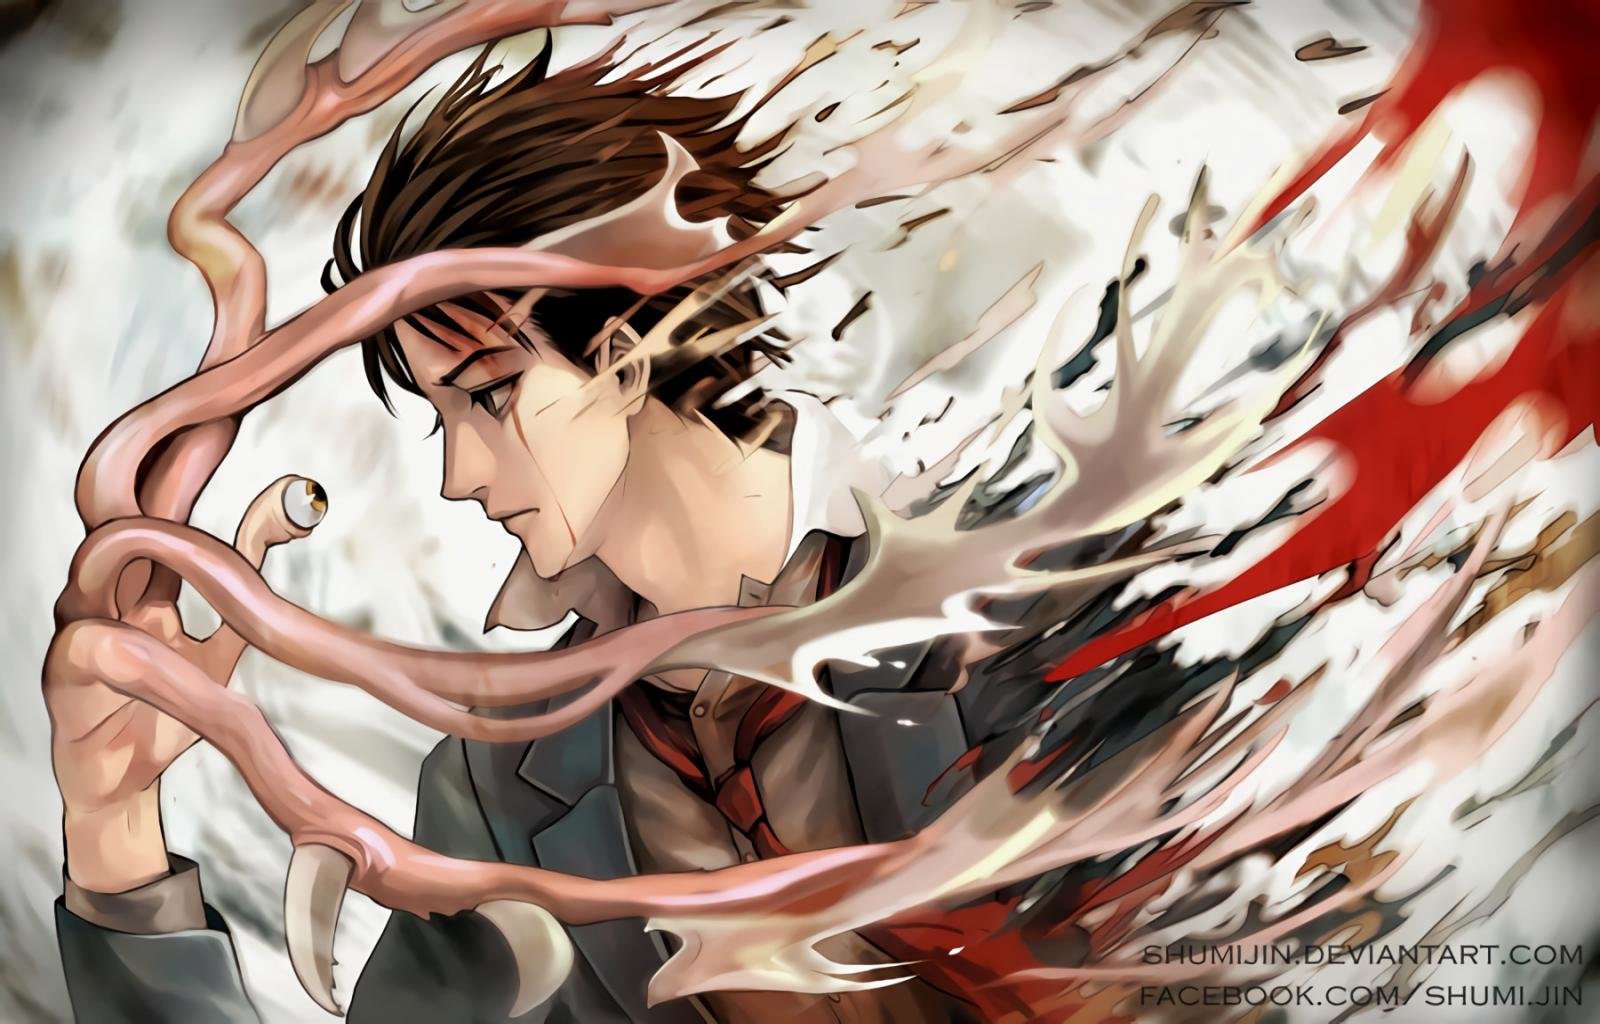 Parasyte  the Maxim  wallpapers HD for desktop backgrounds